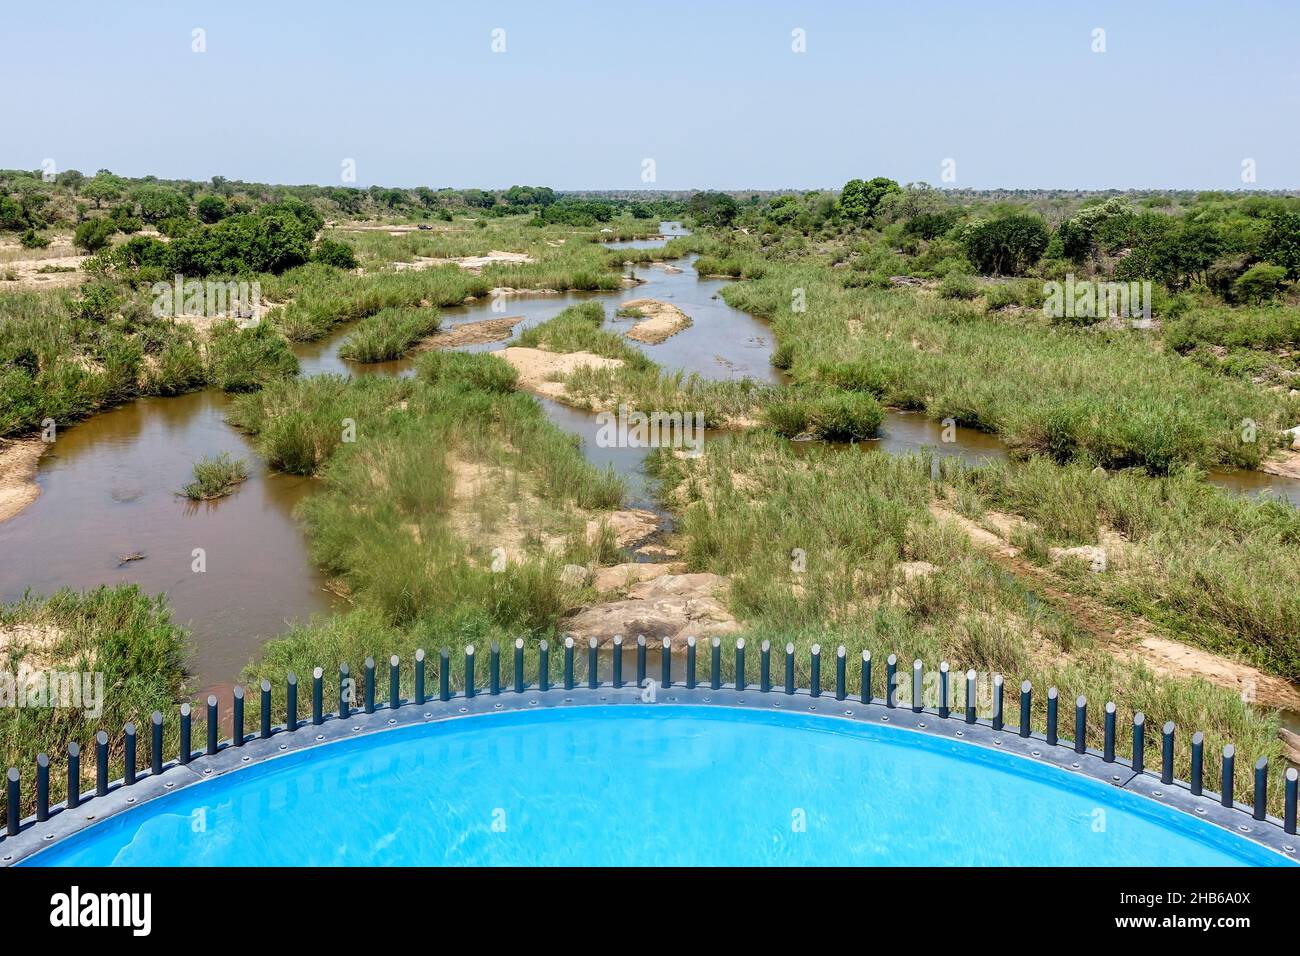 Swimming pool in the Kruger National Park, South Africa Stock Photo